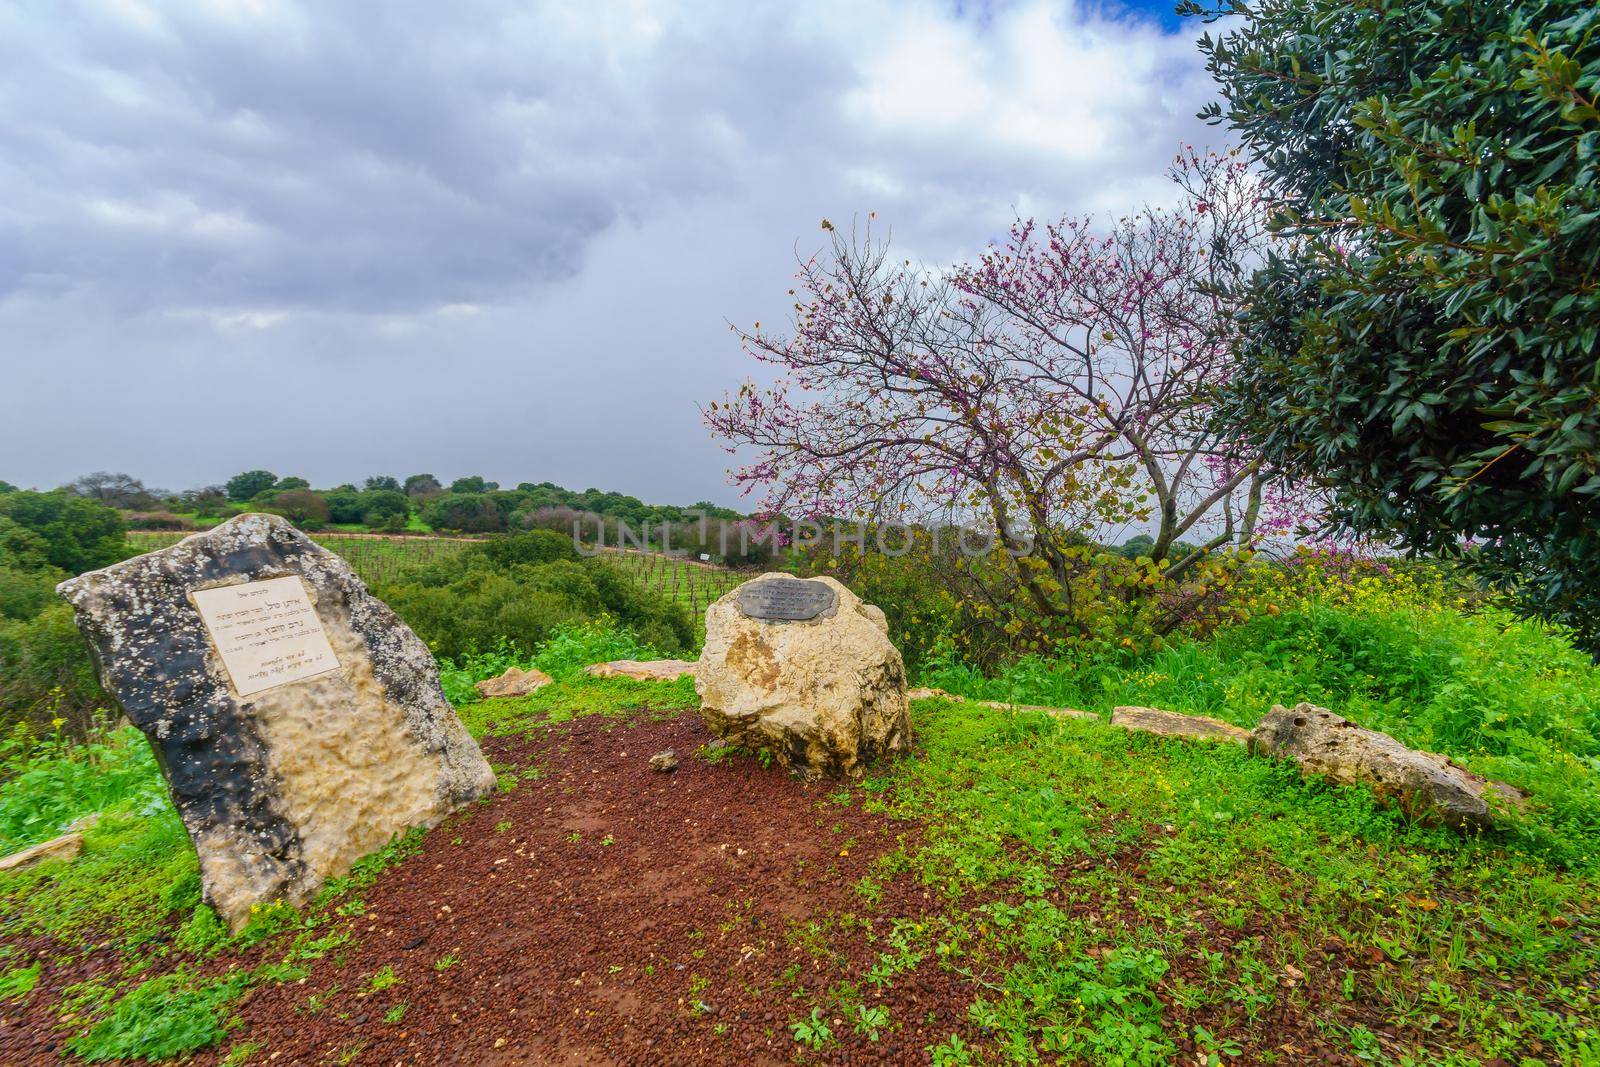 Yiftakh, Israel - February 18, 2021: View of the Yiftakh observation point, with memorial signs and countryside, Upper Galilee, Northern Israel